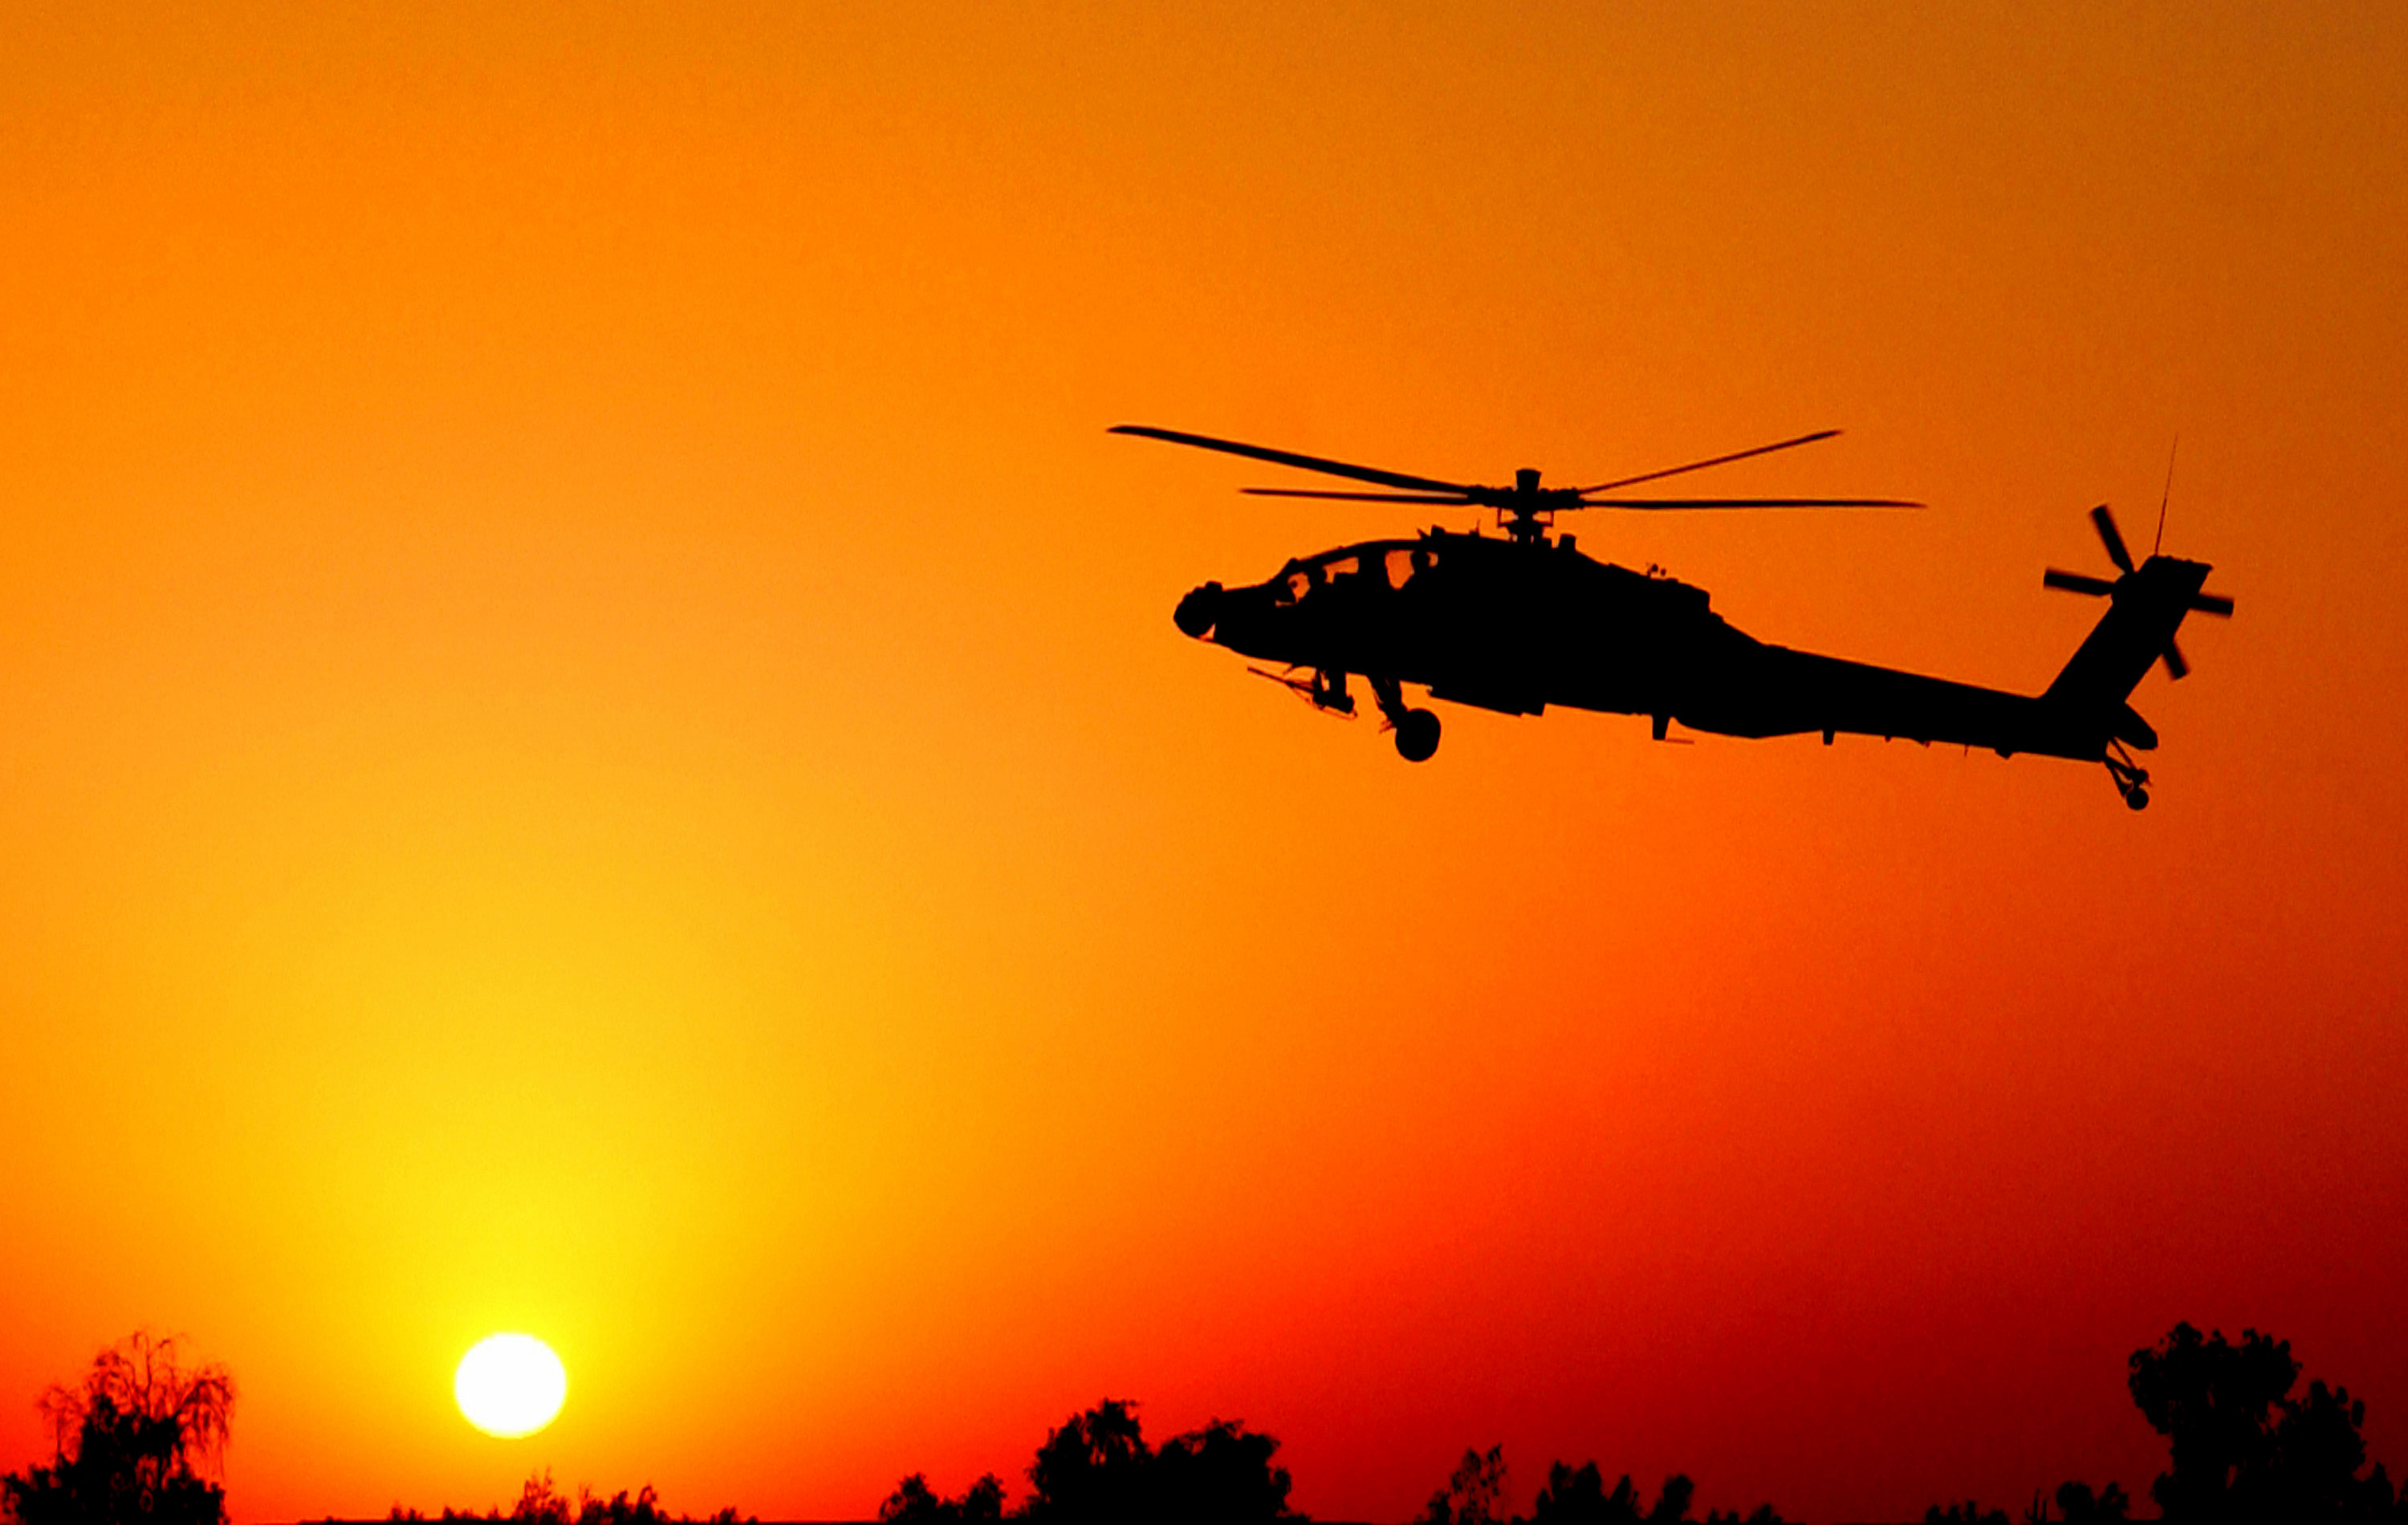 helicopter wallpaper,helicopter,helicopter rotor,rotorcraft,aircraft,military helicopter